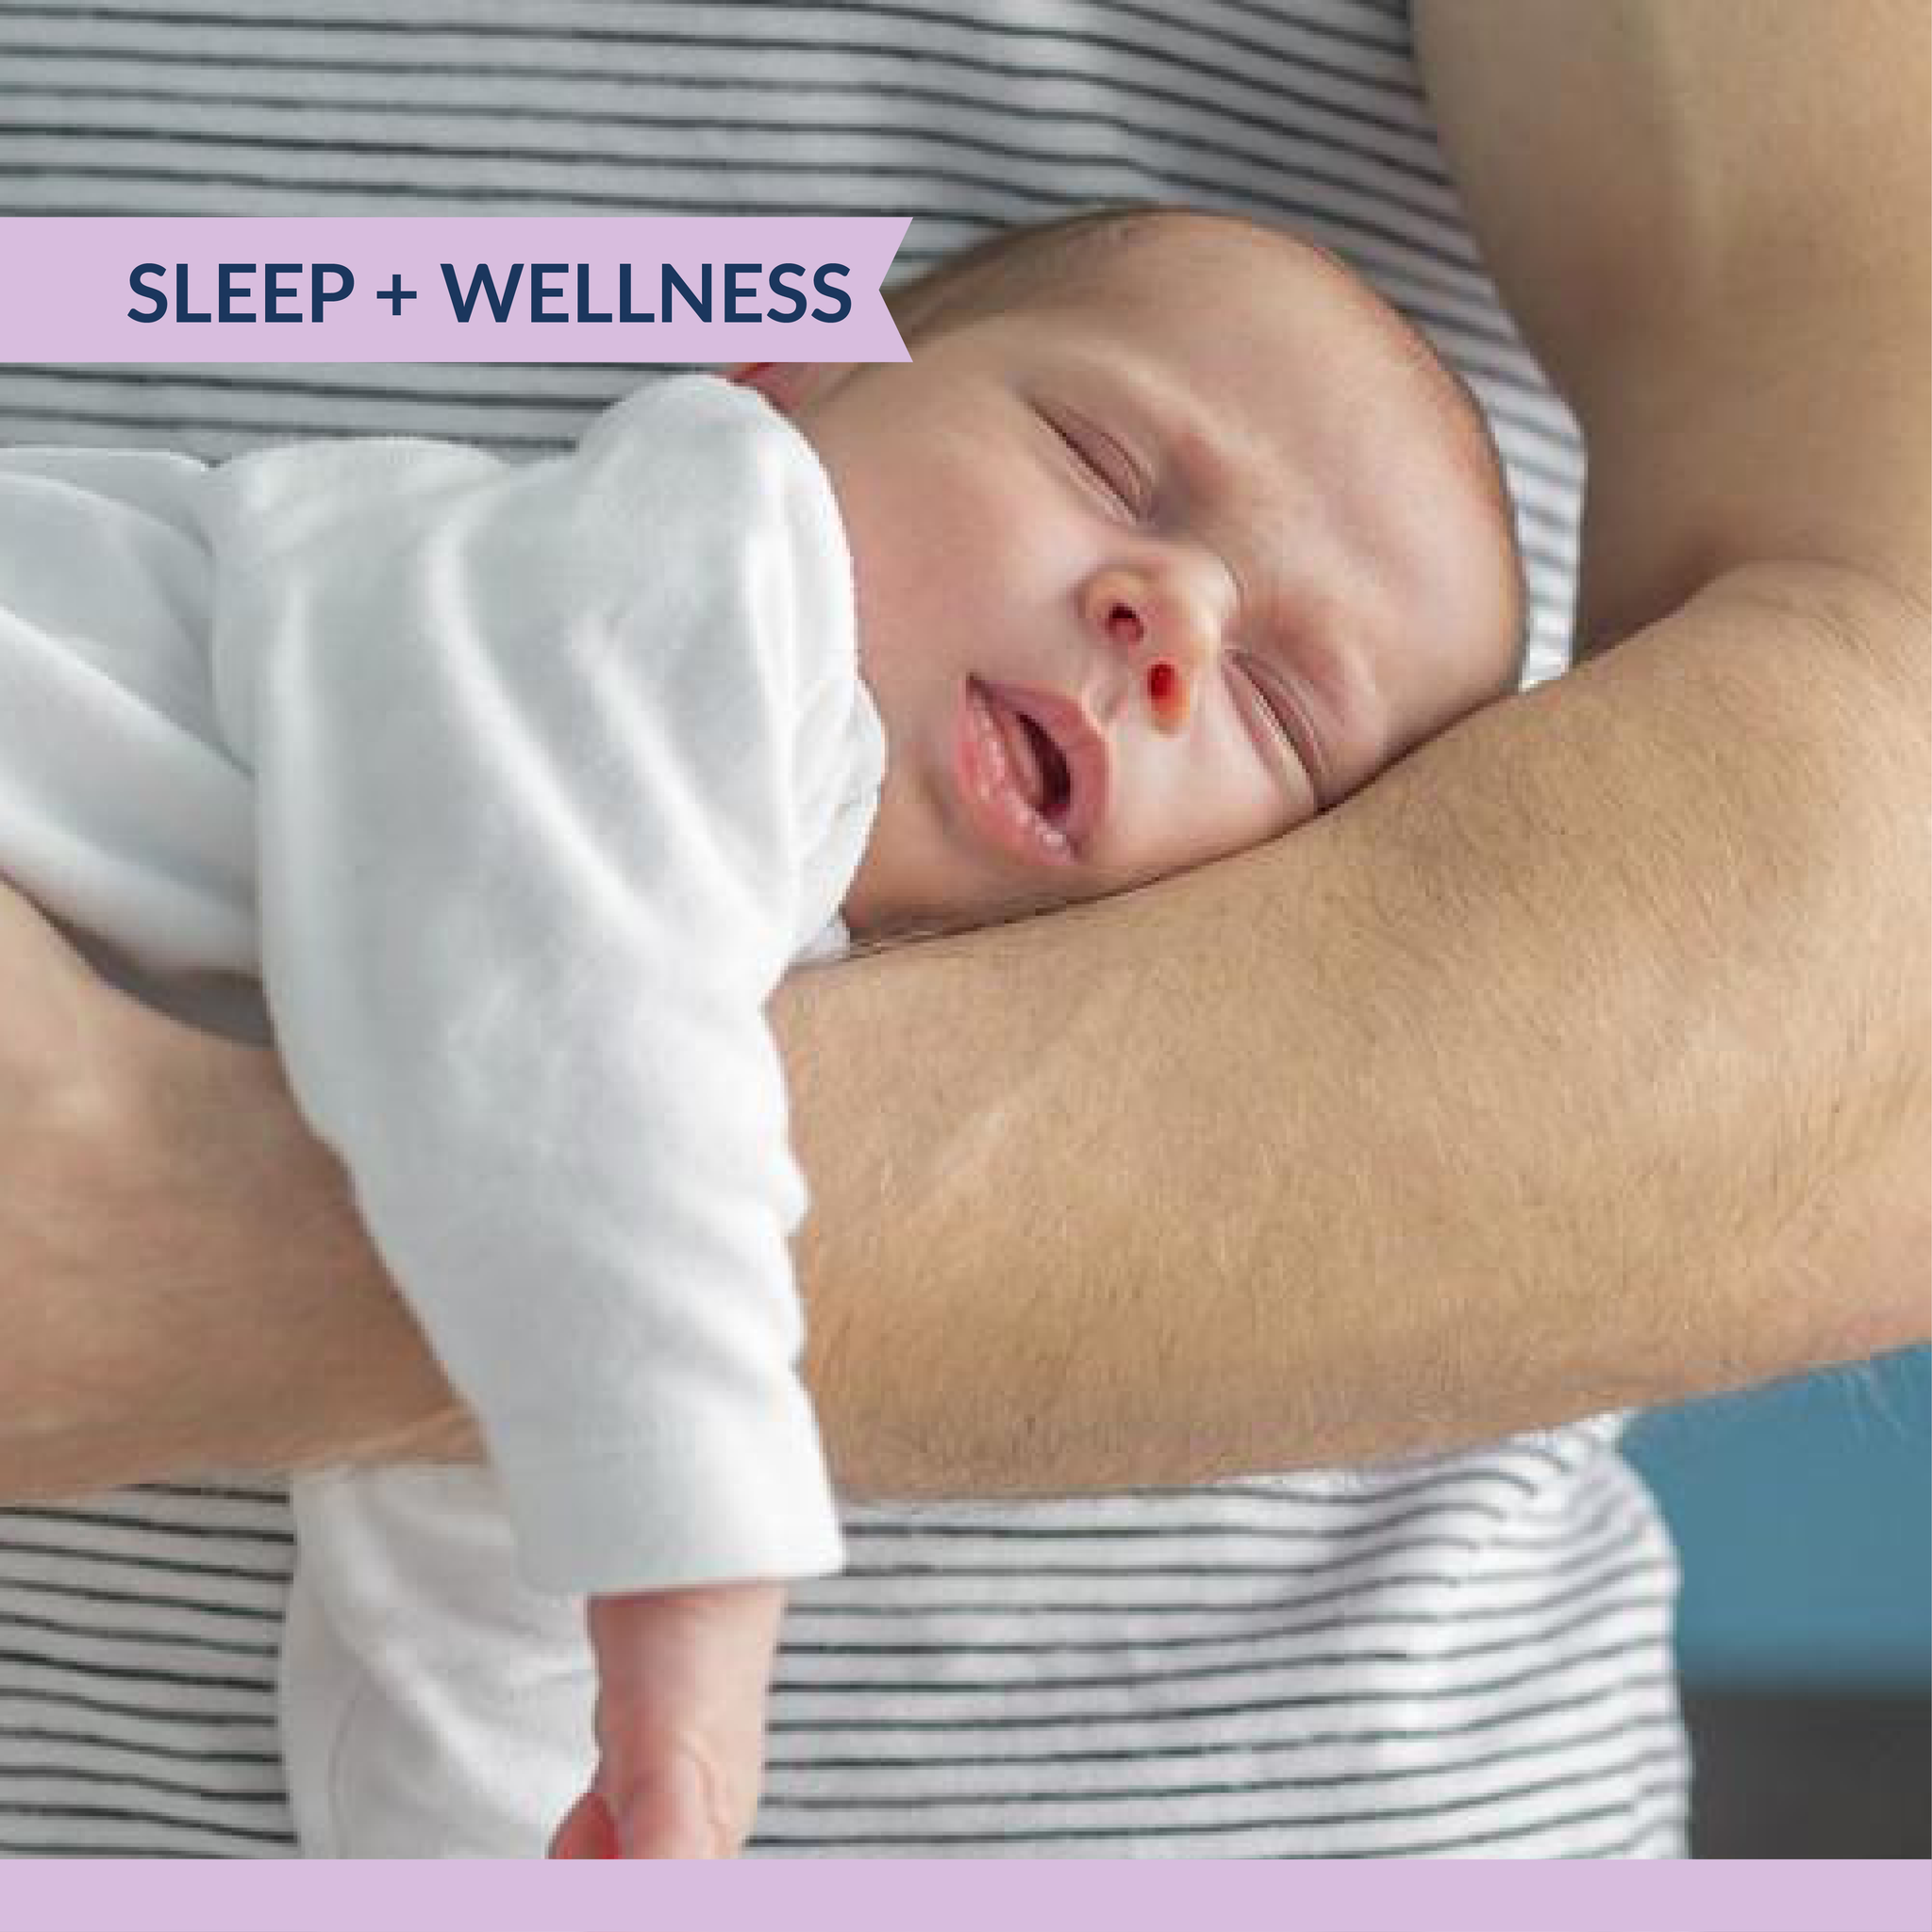 7 Sure-Fire Tips to Get Your Baby to Sleep